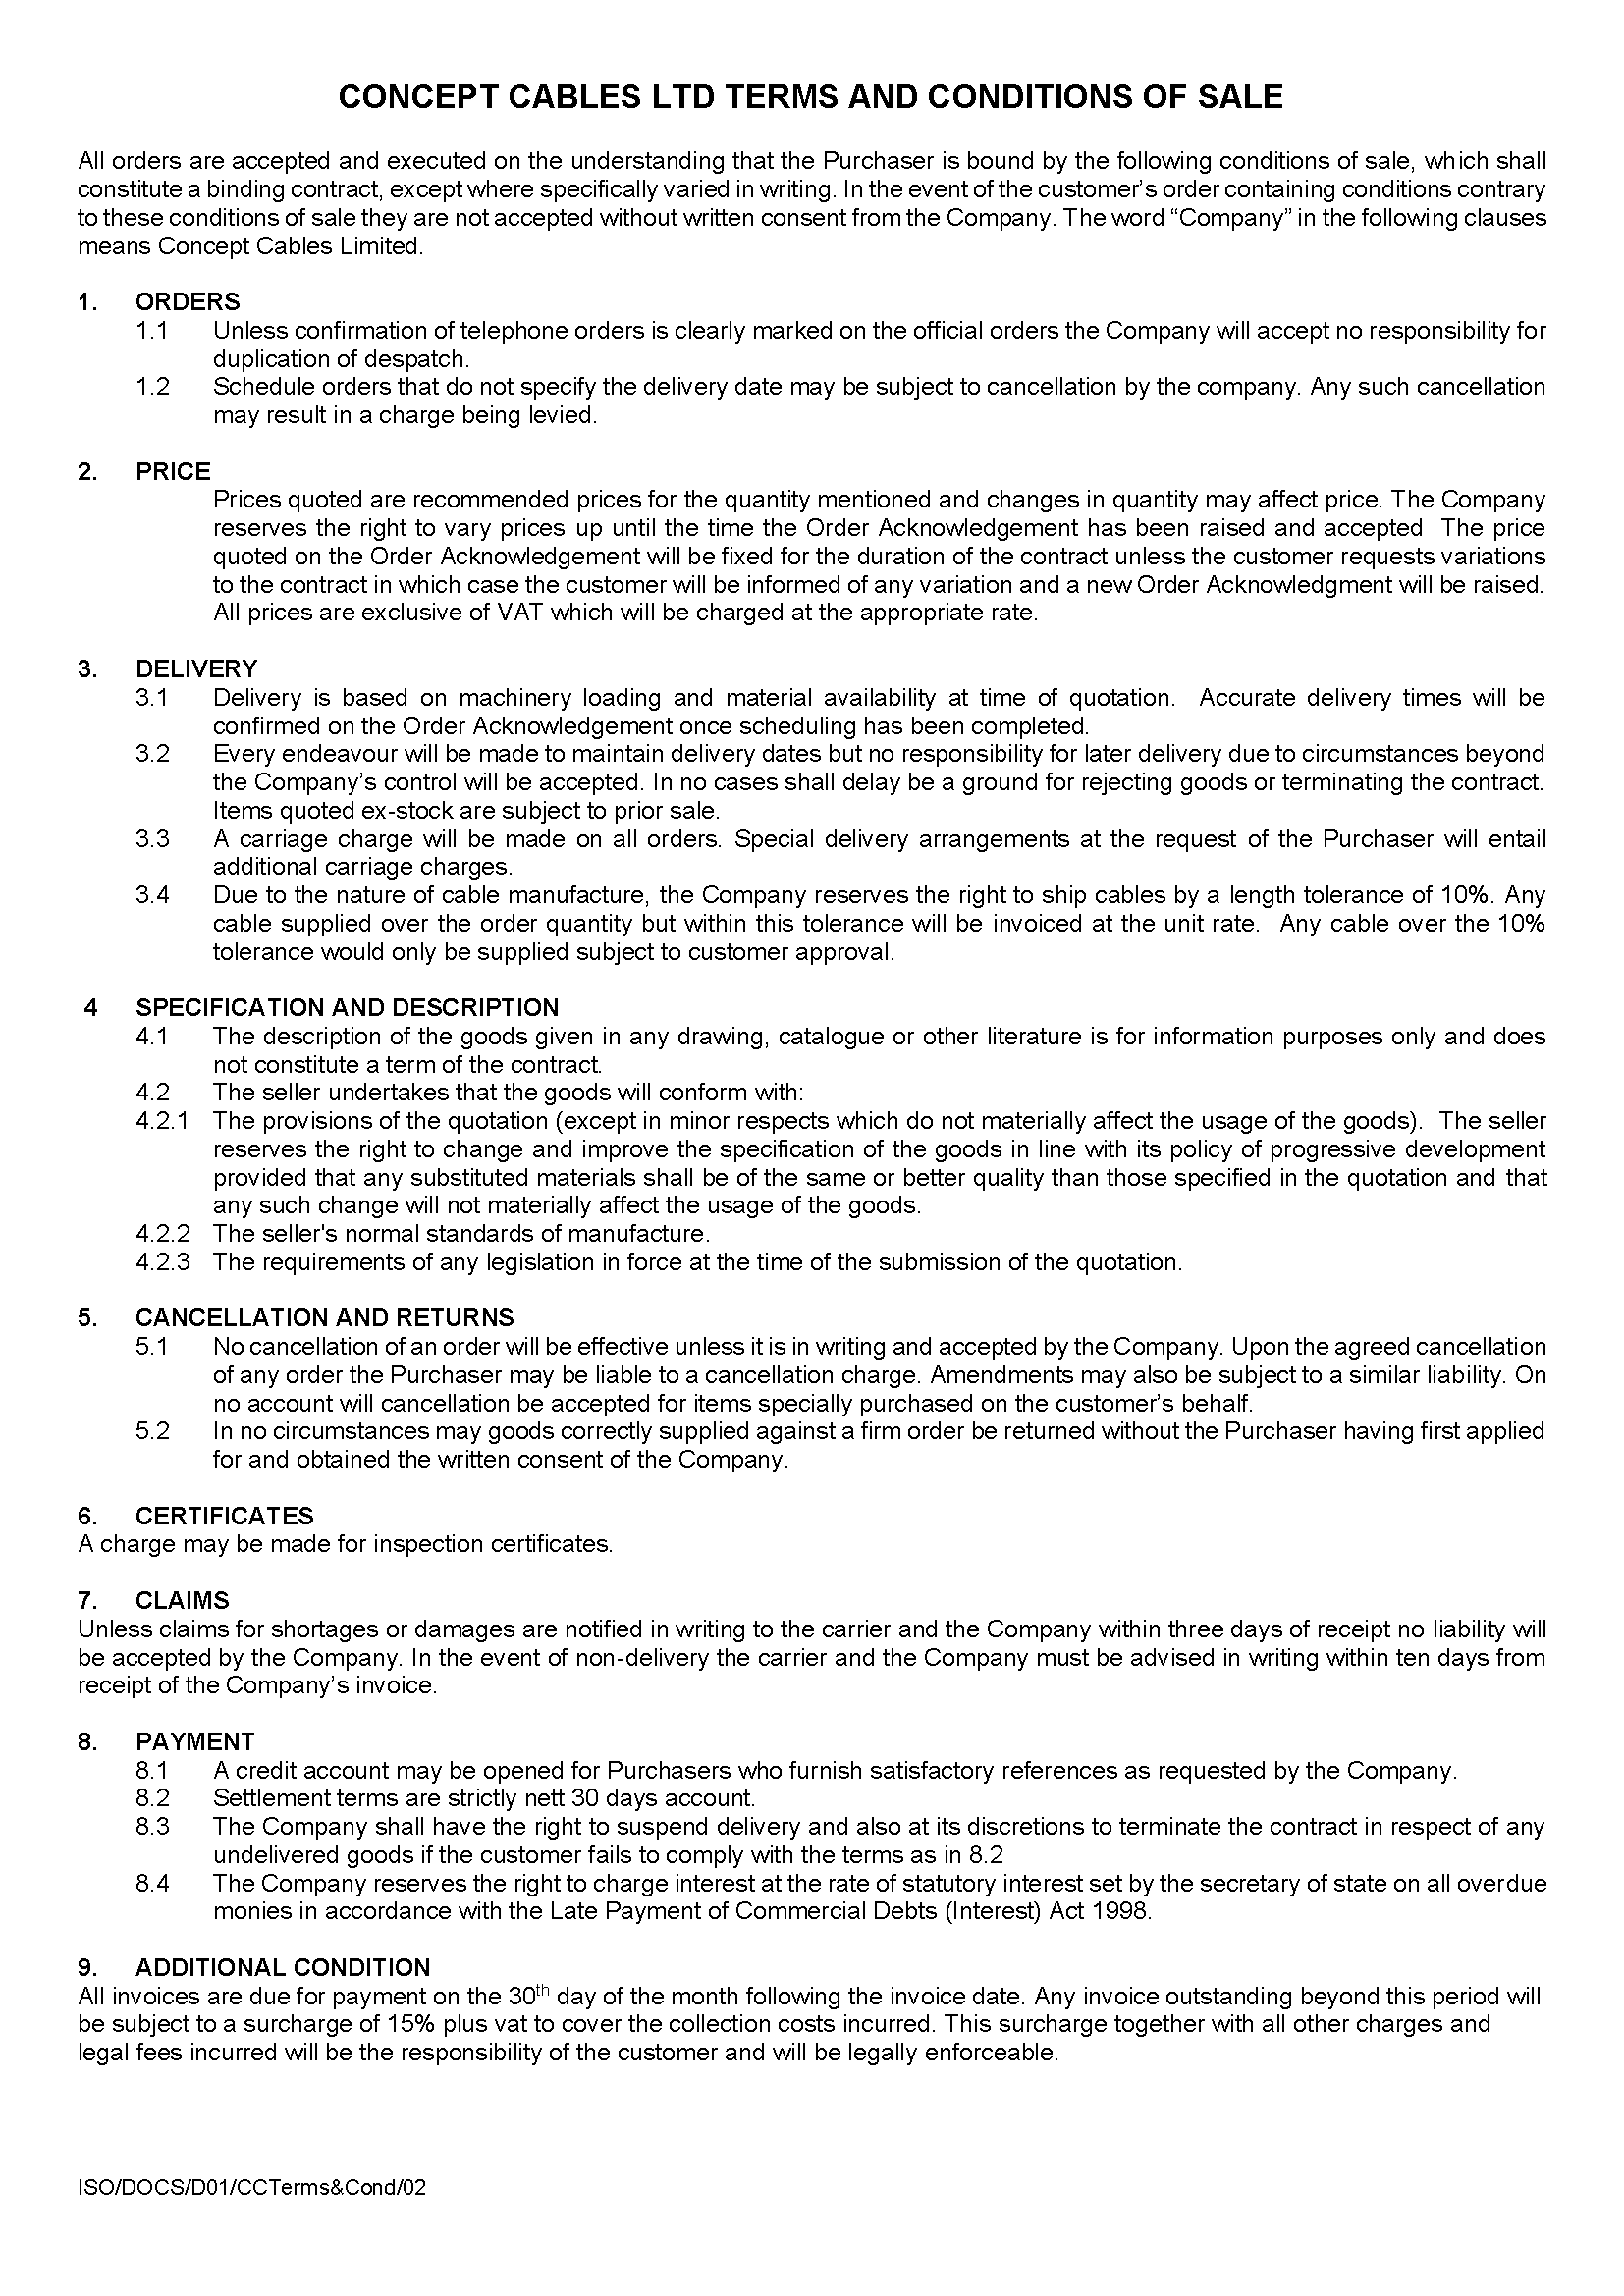 Concept Cables Terms & Conditions of Sale (Page1)